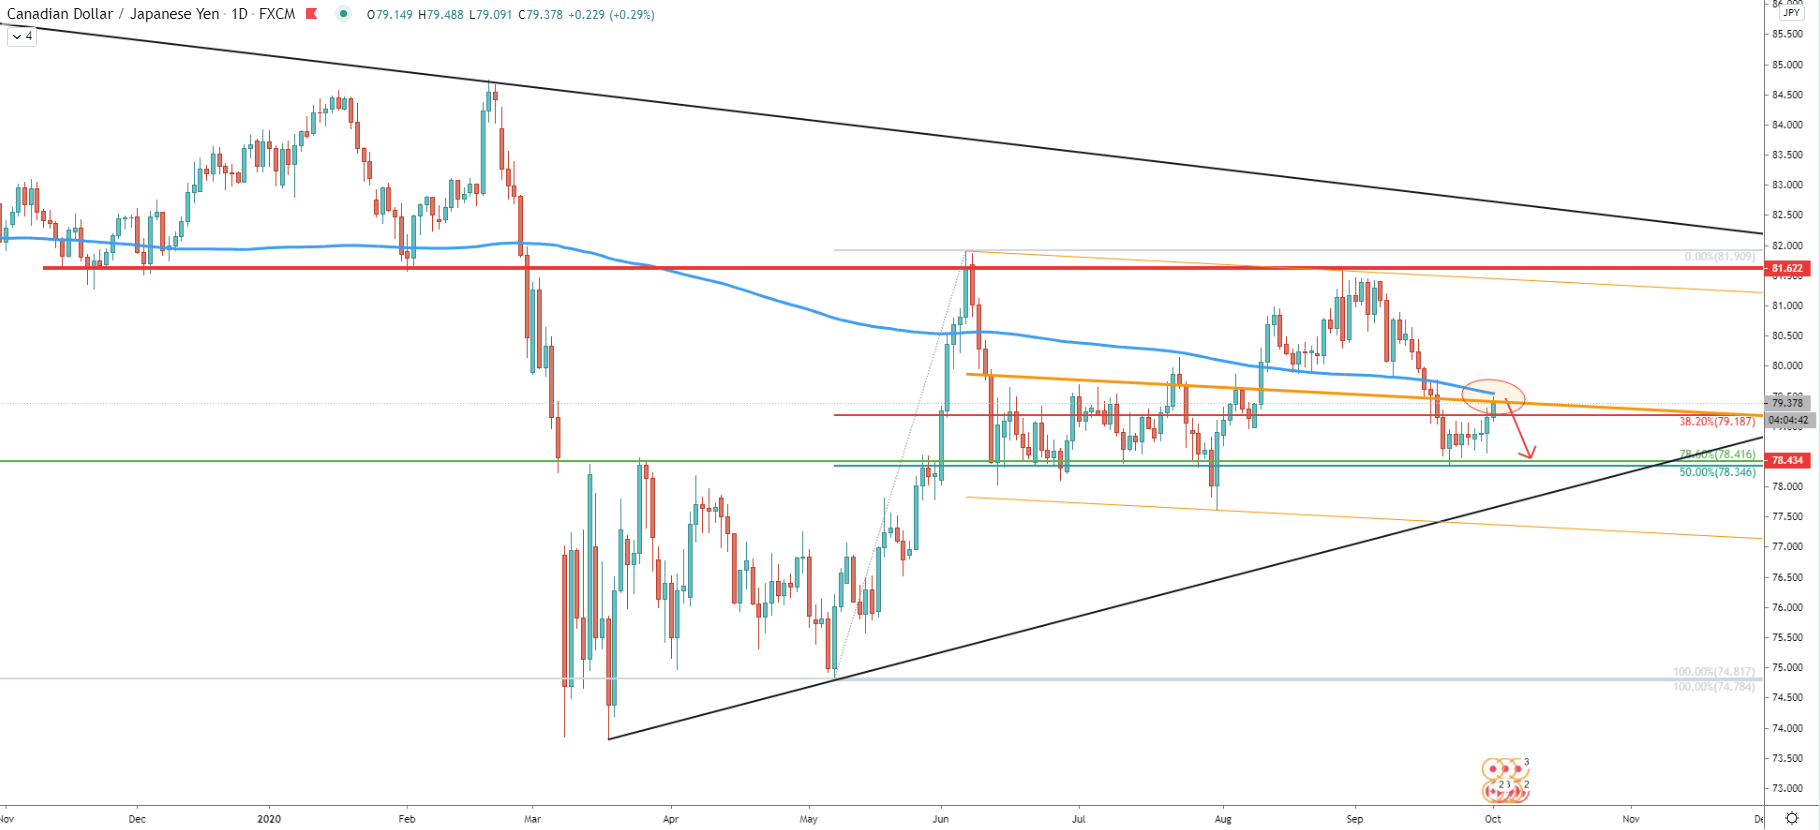 CAD/JPY Daily Technical Analysis 1 Oct 2020